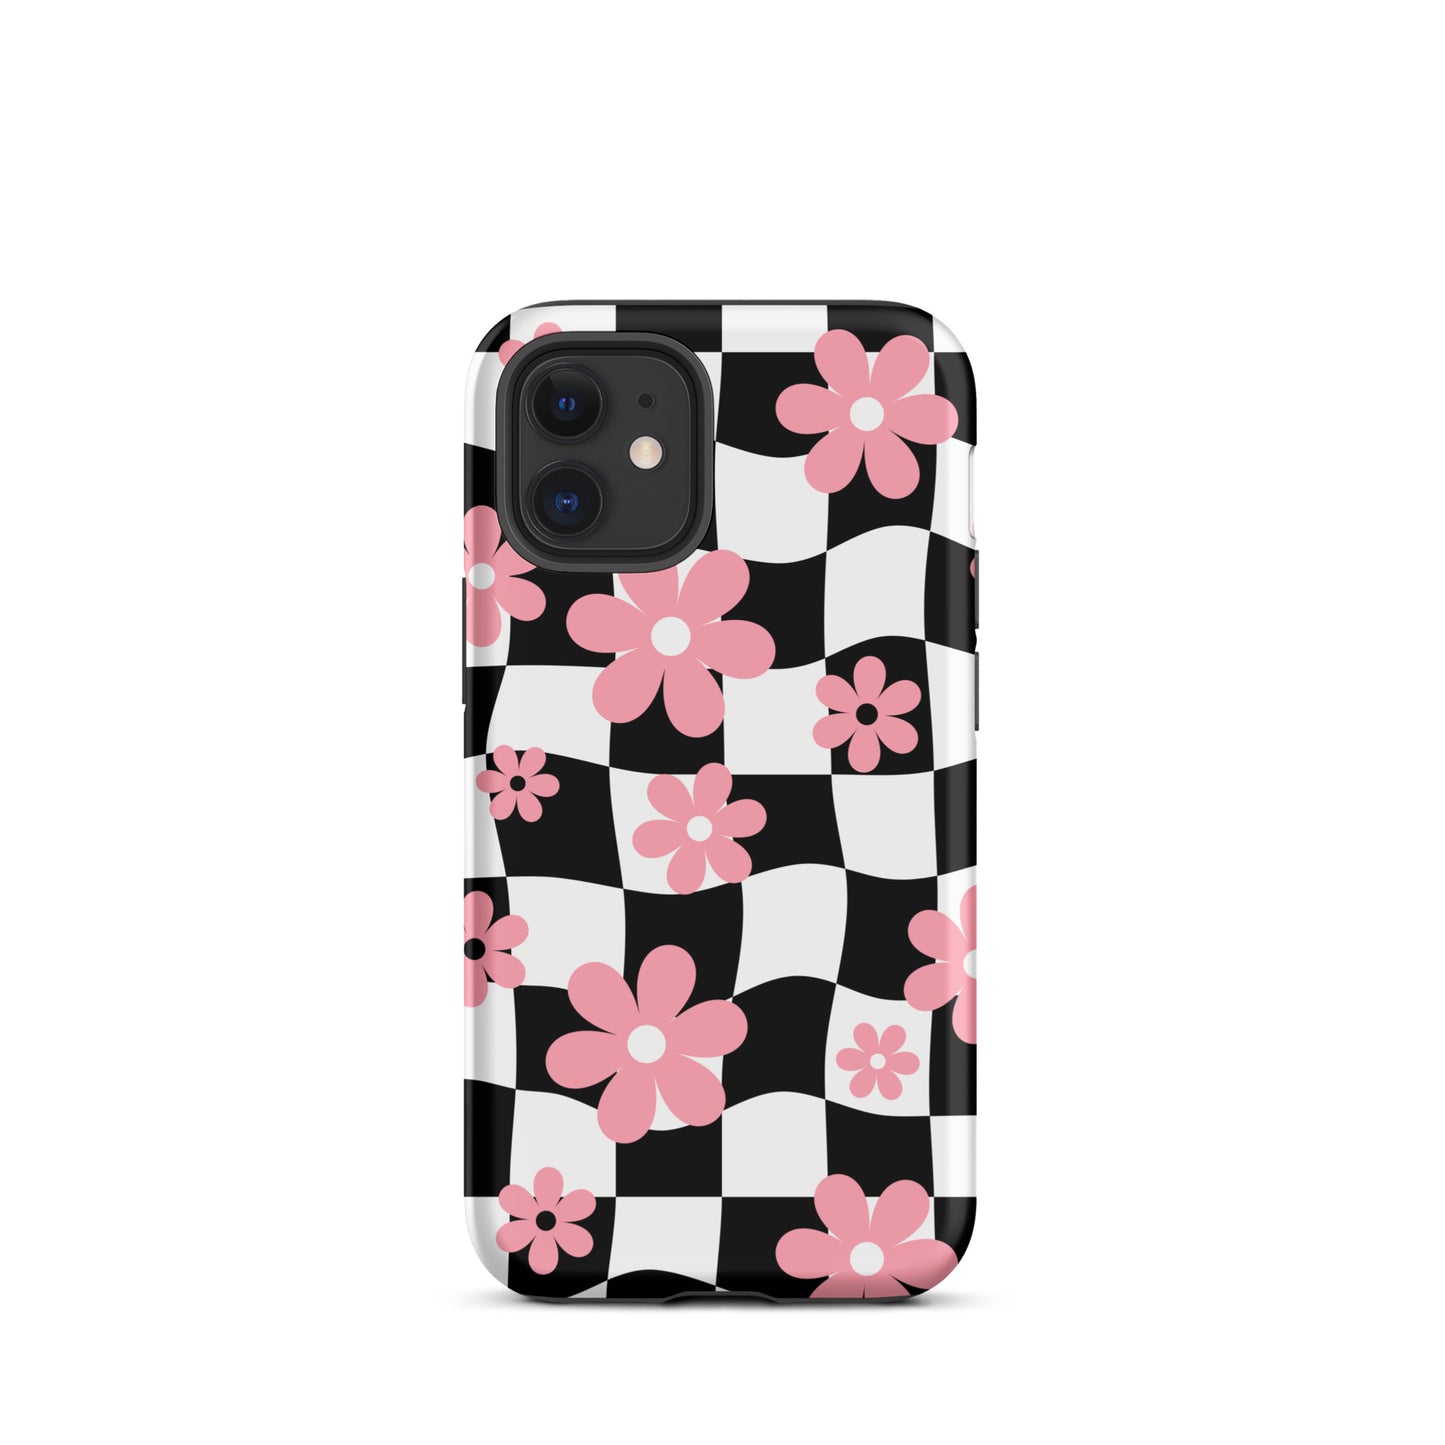 Floral Wavy Checkered iPhone Case iPhone 12 mini Matte